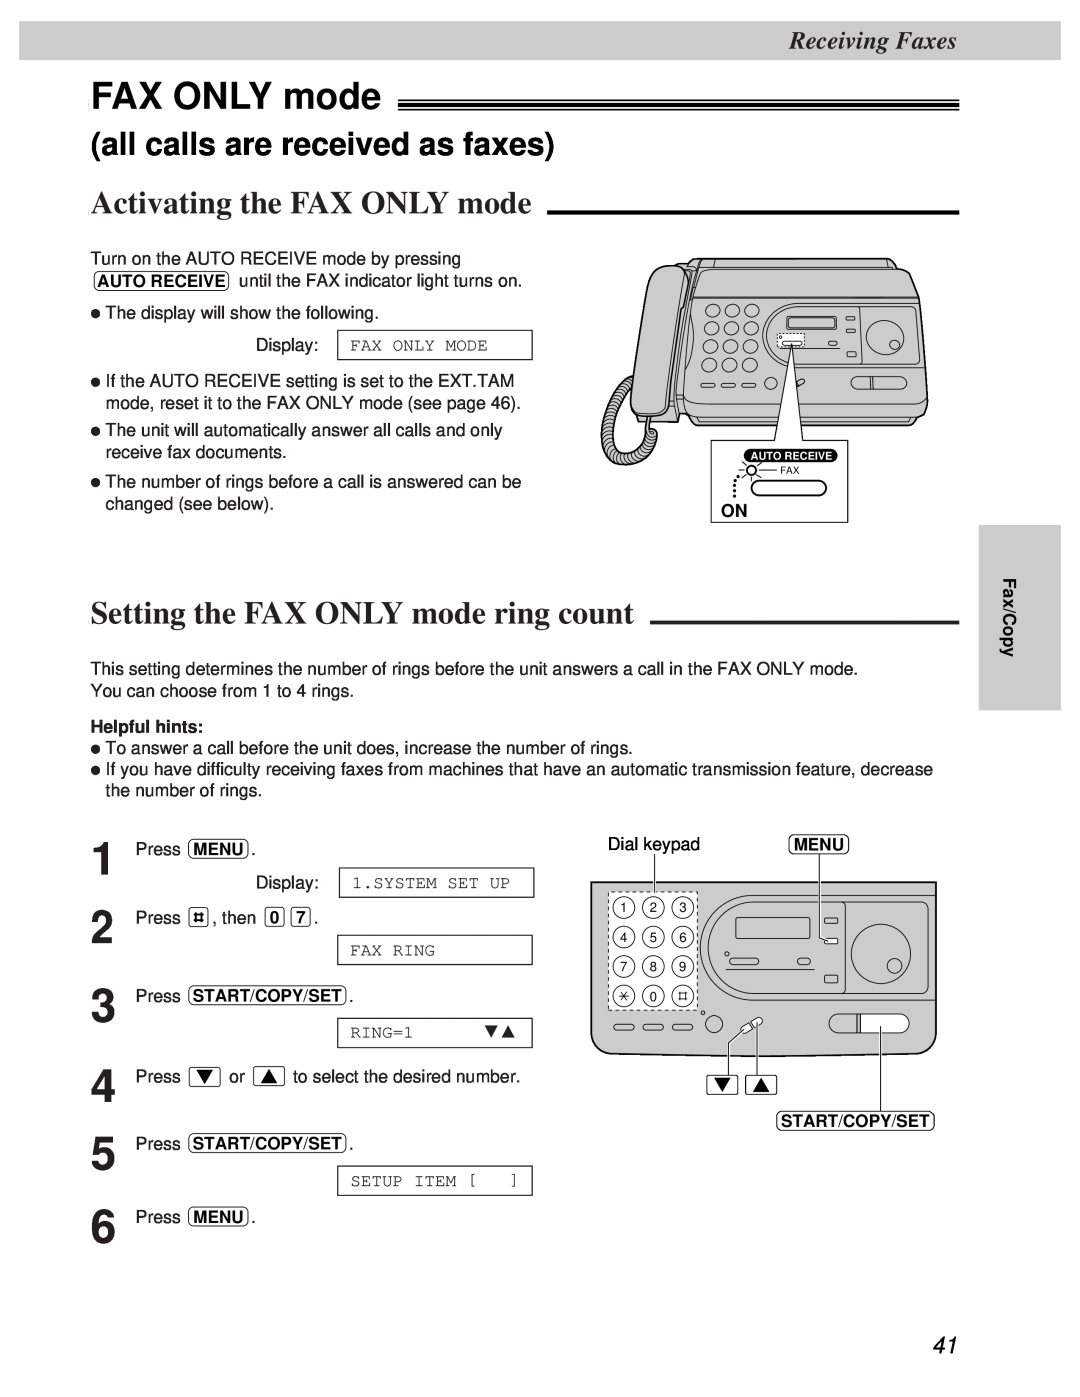 Panasonic KX-FT31BX quick start all calls are received as faxes, Activating the FAX ONLY mode, Receiving Faxes 